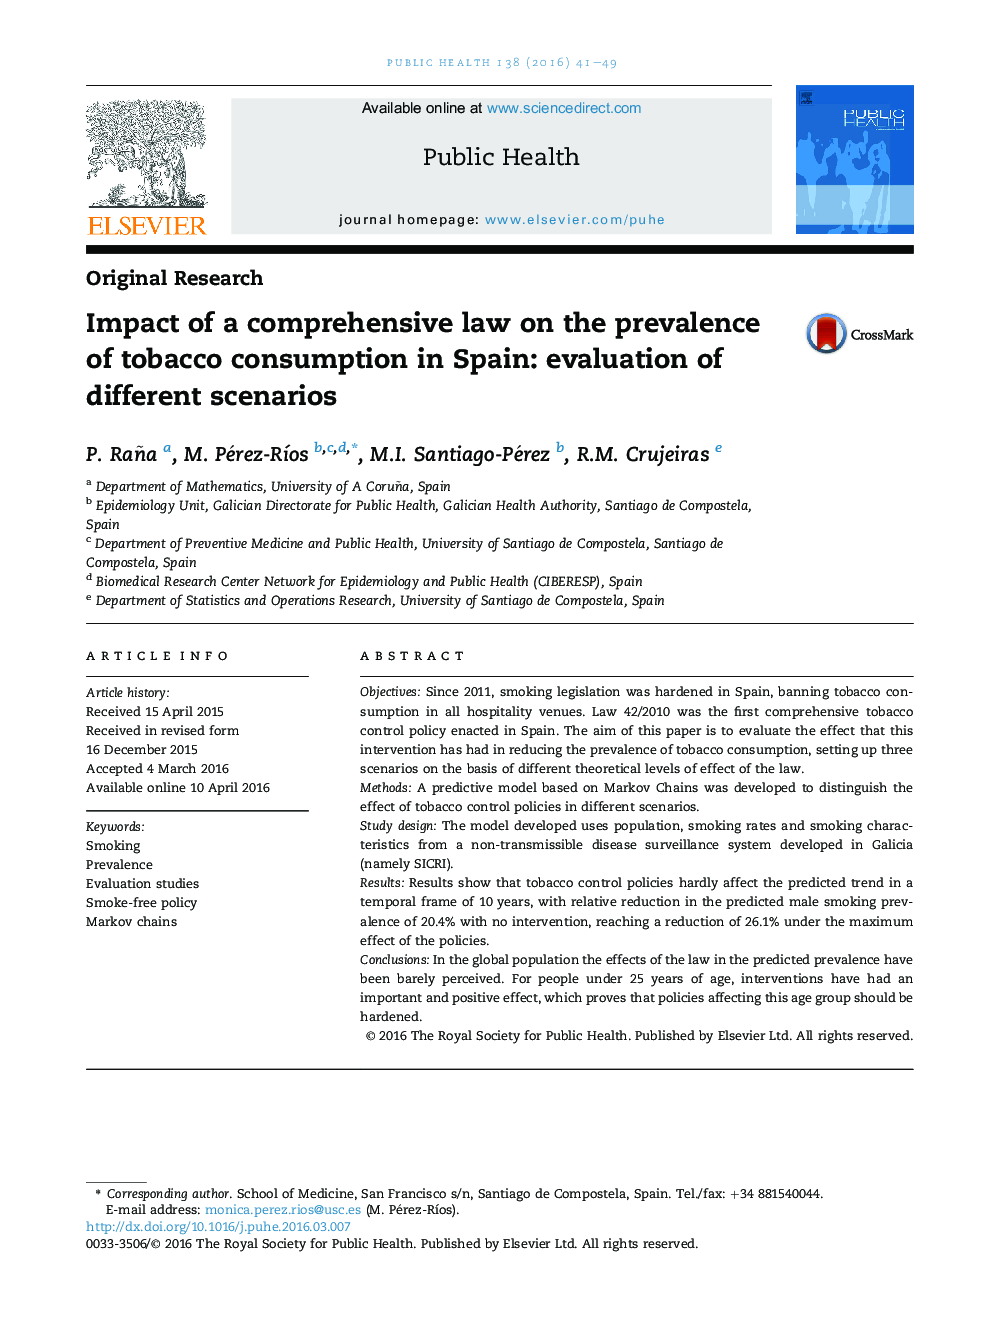 Impact of a comprehensive law on the prevalence of tobacco consumption in Spain: evaluation of different scenarios